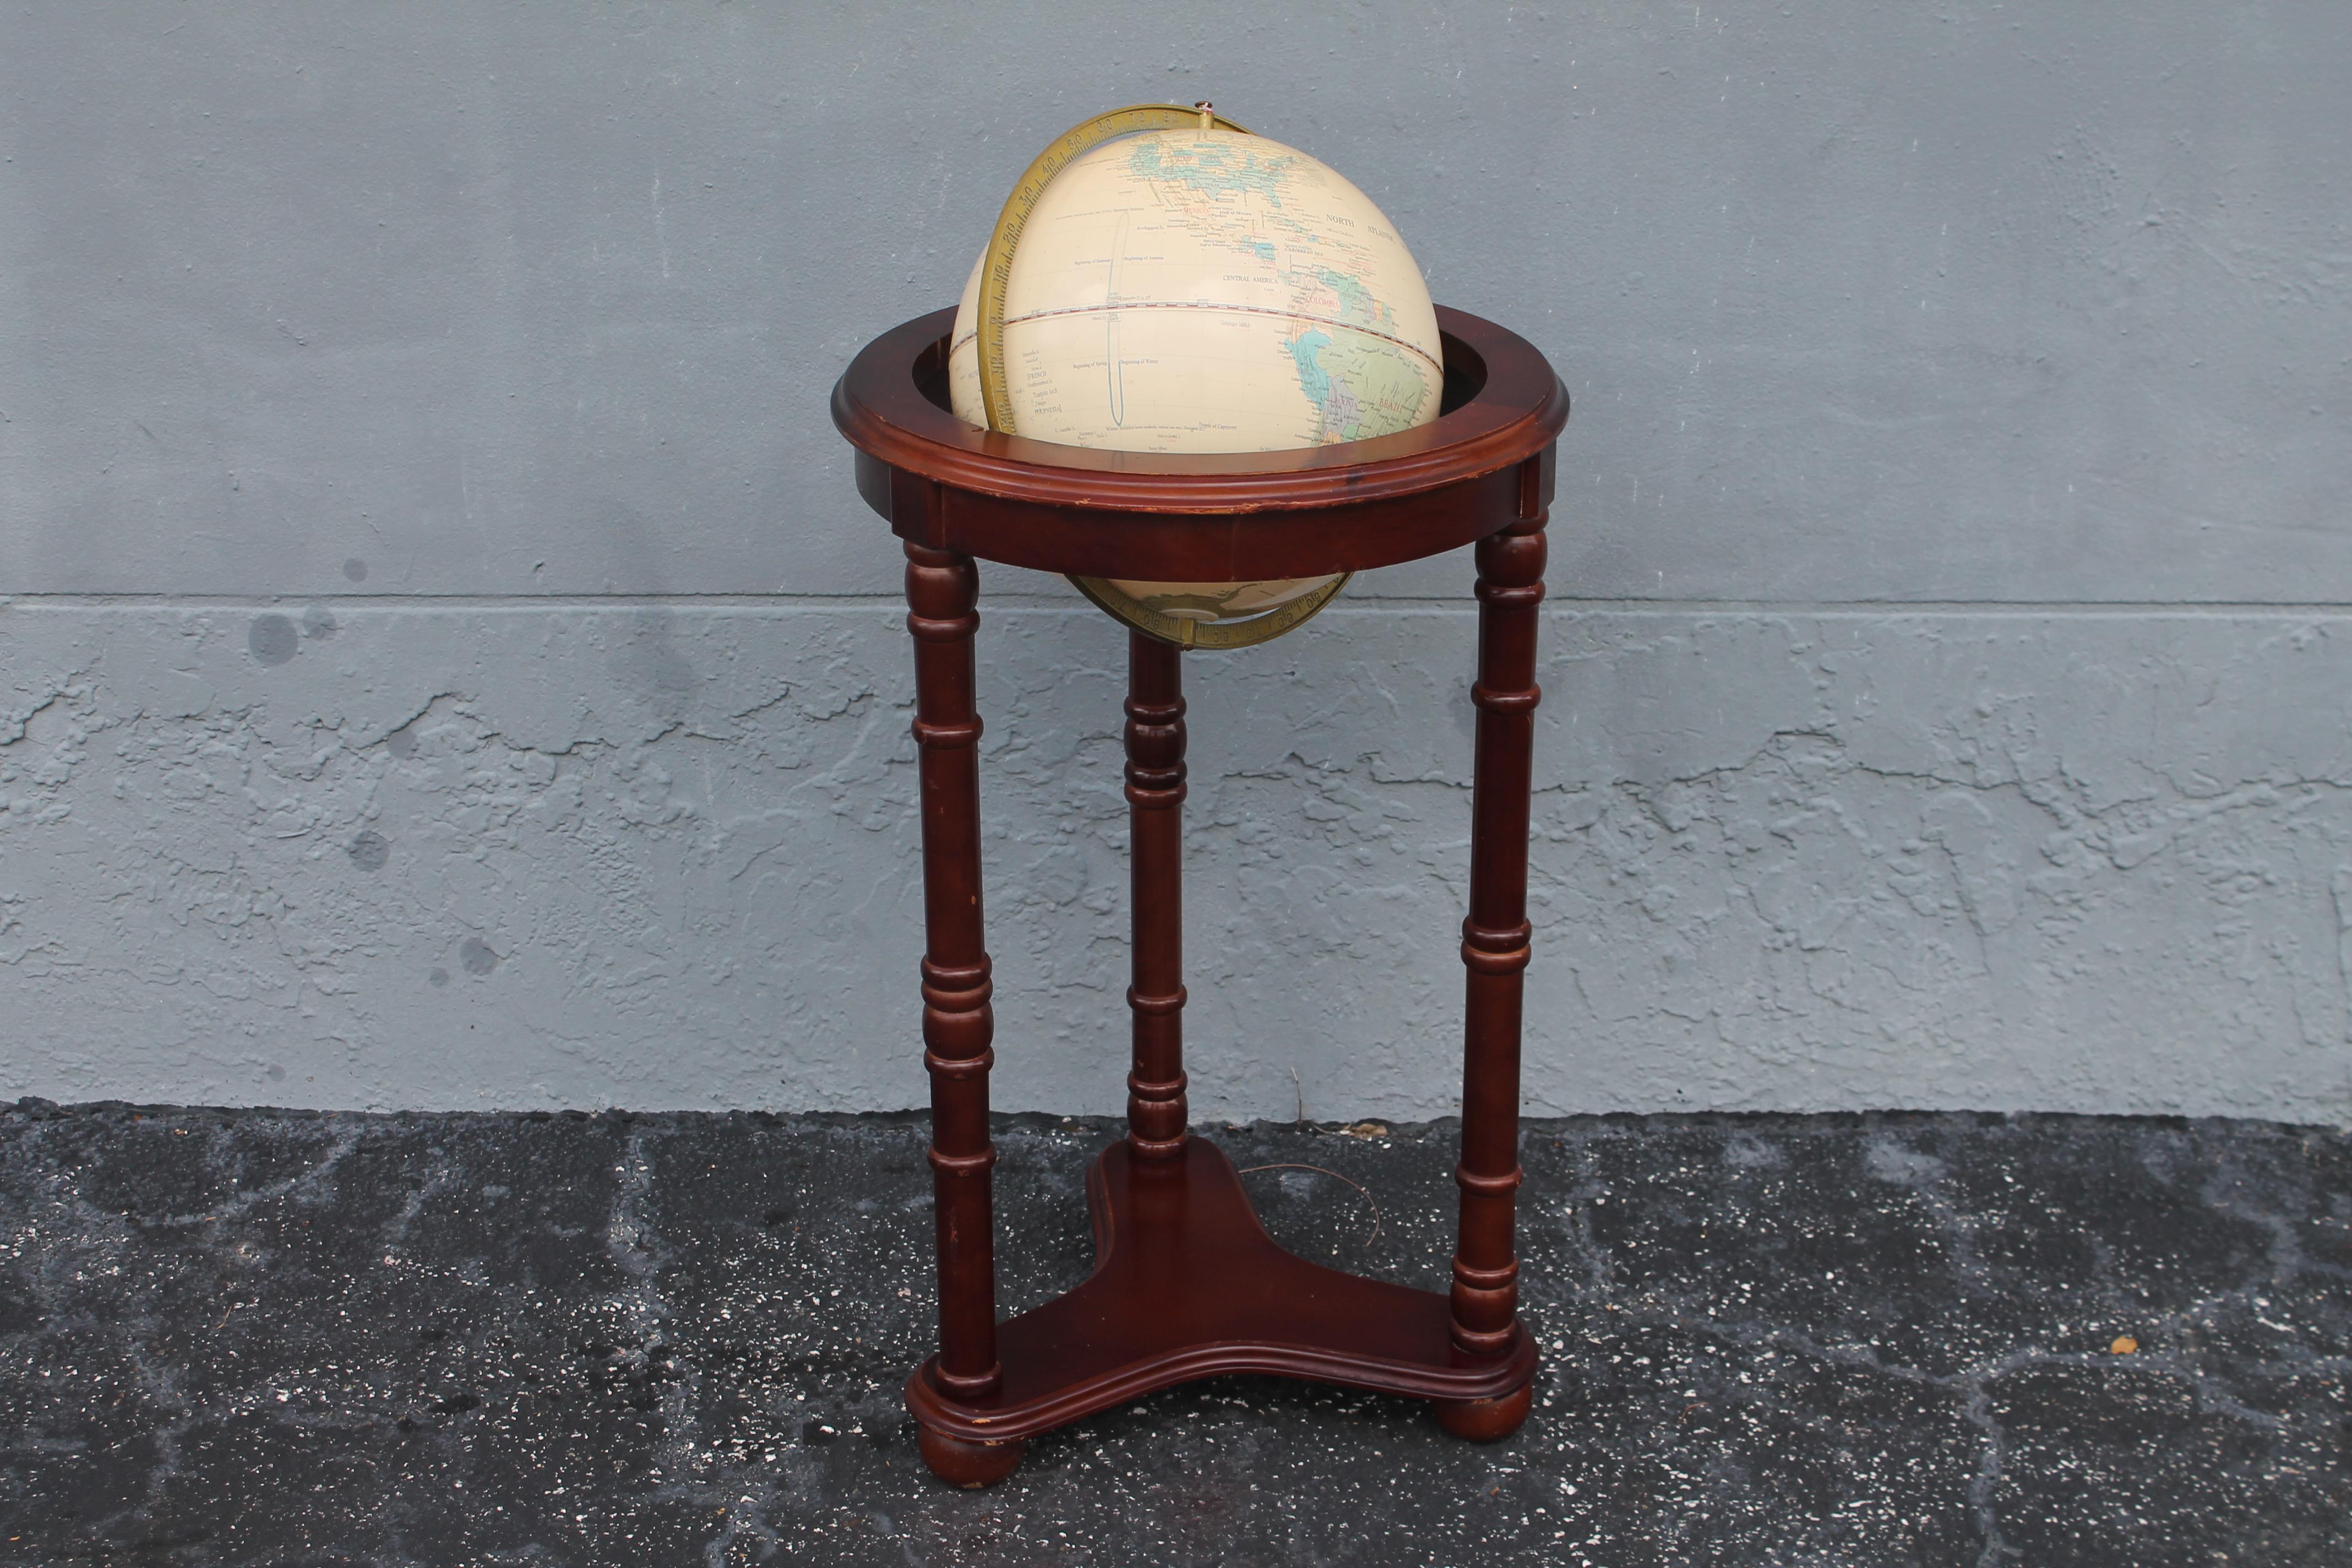 c1920's French Art Deco Worl Globe On Pedestal. Rare form, this globe stands beautifully on this original base.